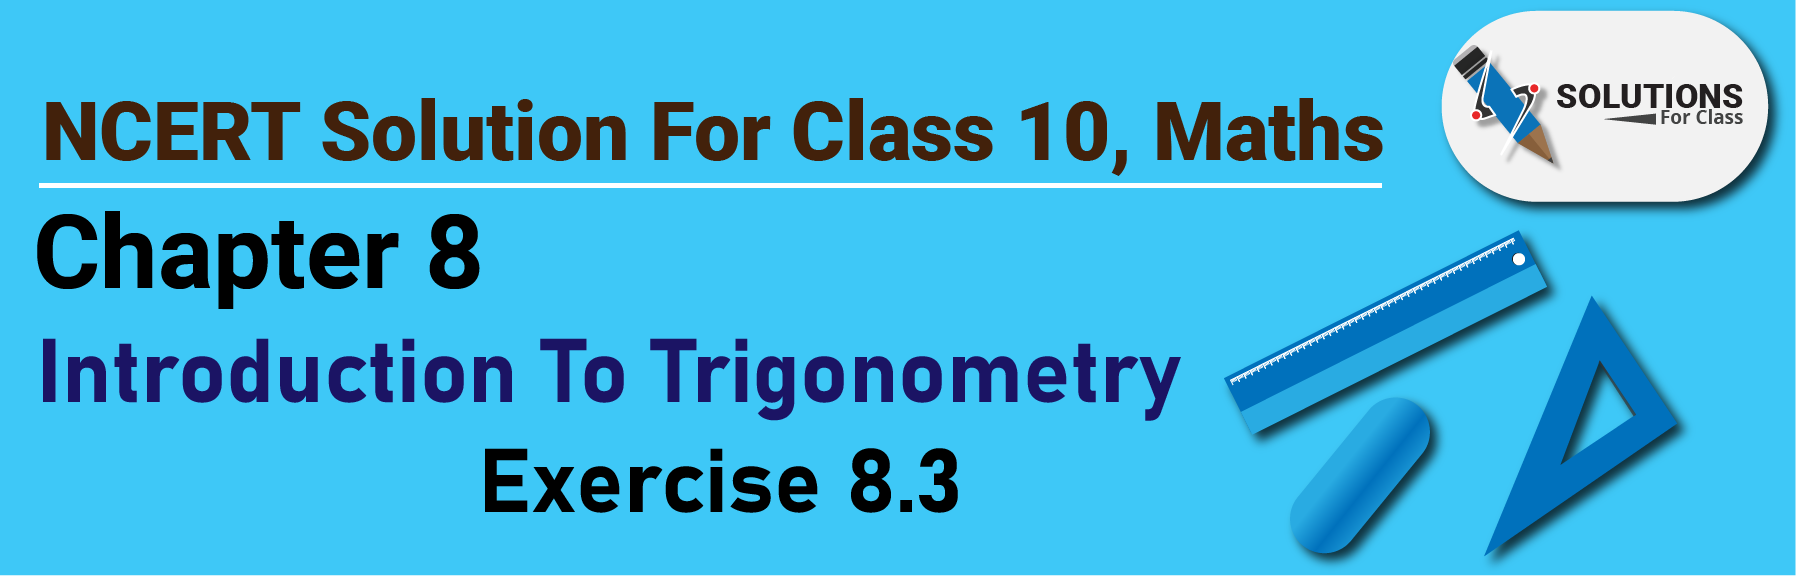 NCERT Solution For Class 10, Maths, Chapter 8, Introduction To Trigonometry, Ex. 8.3